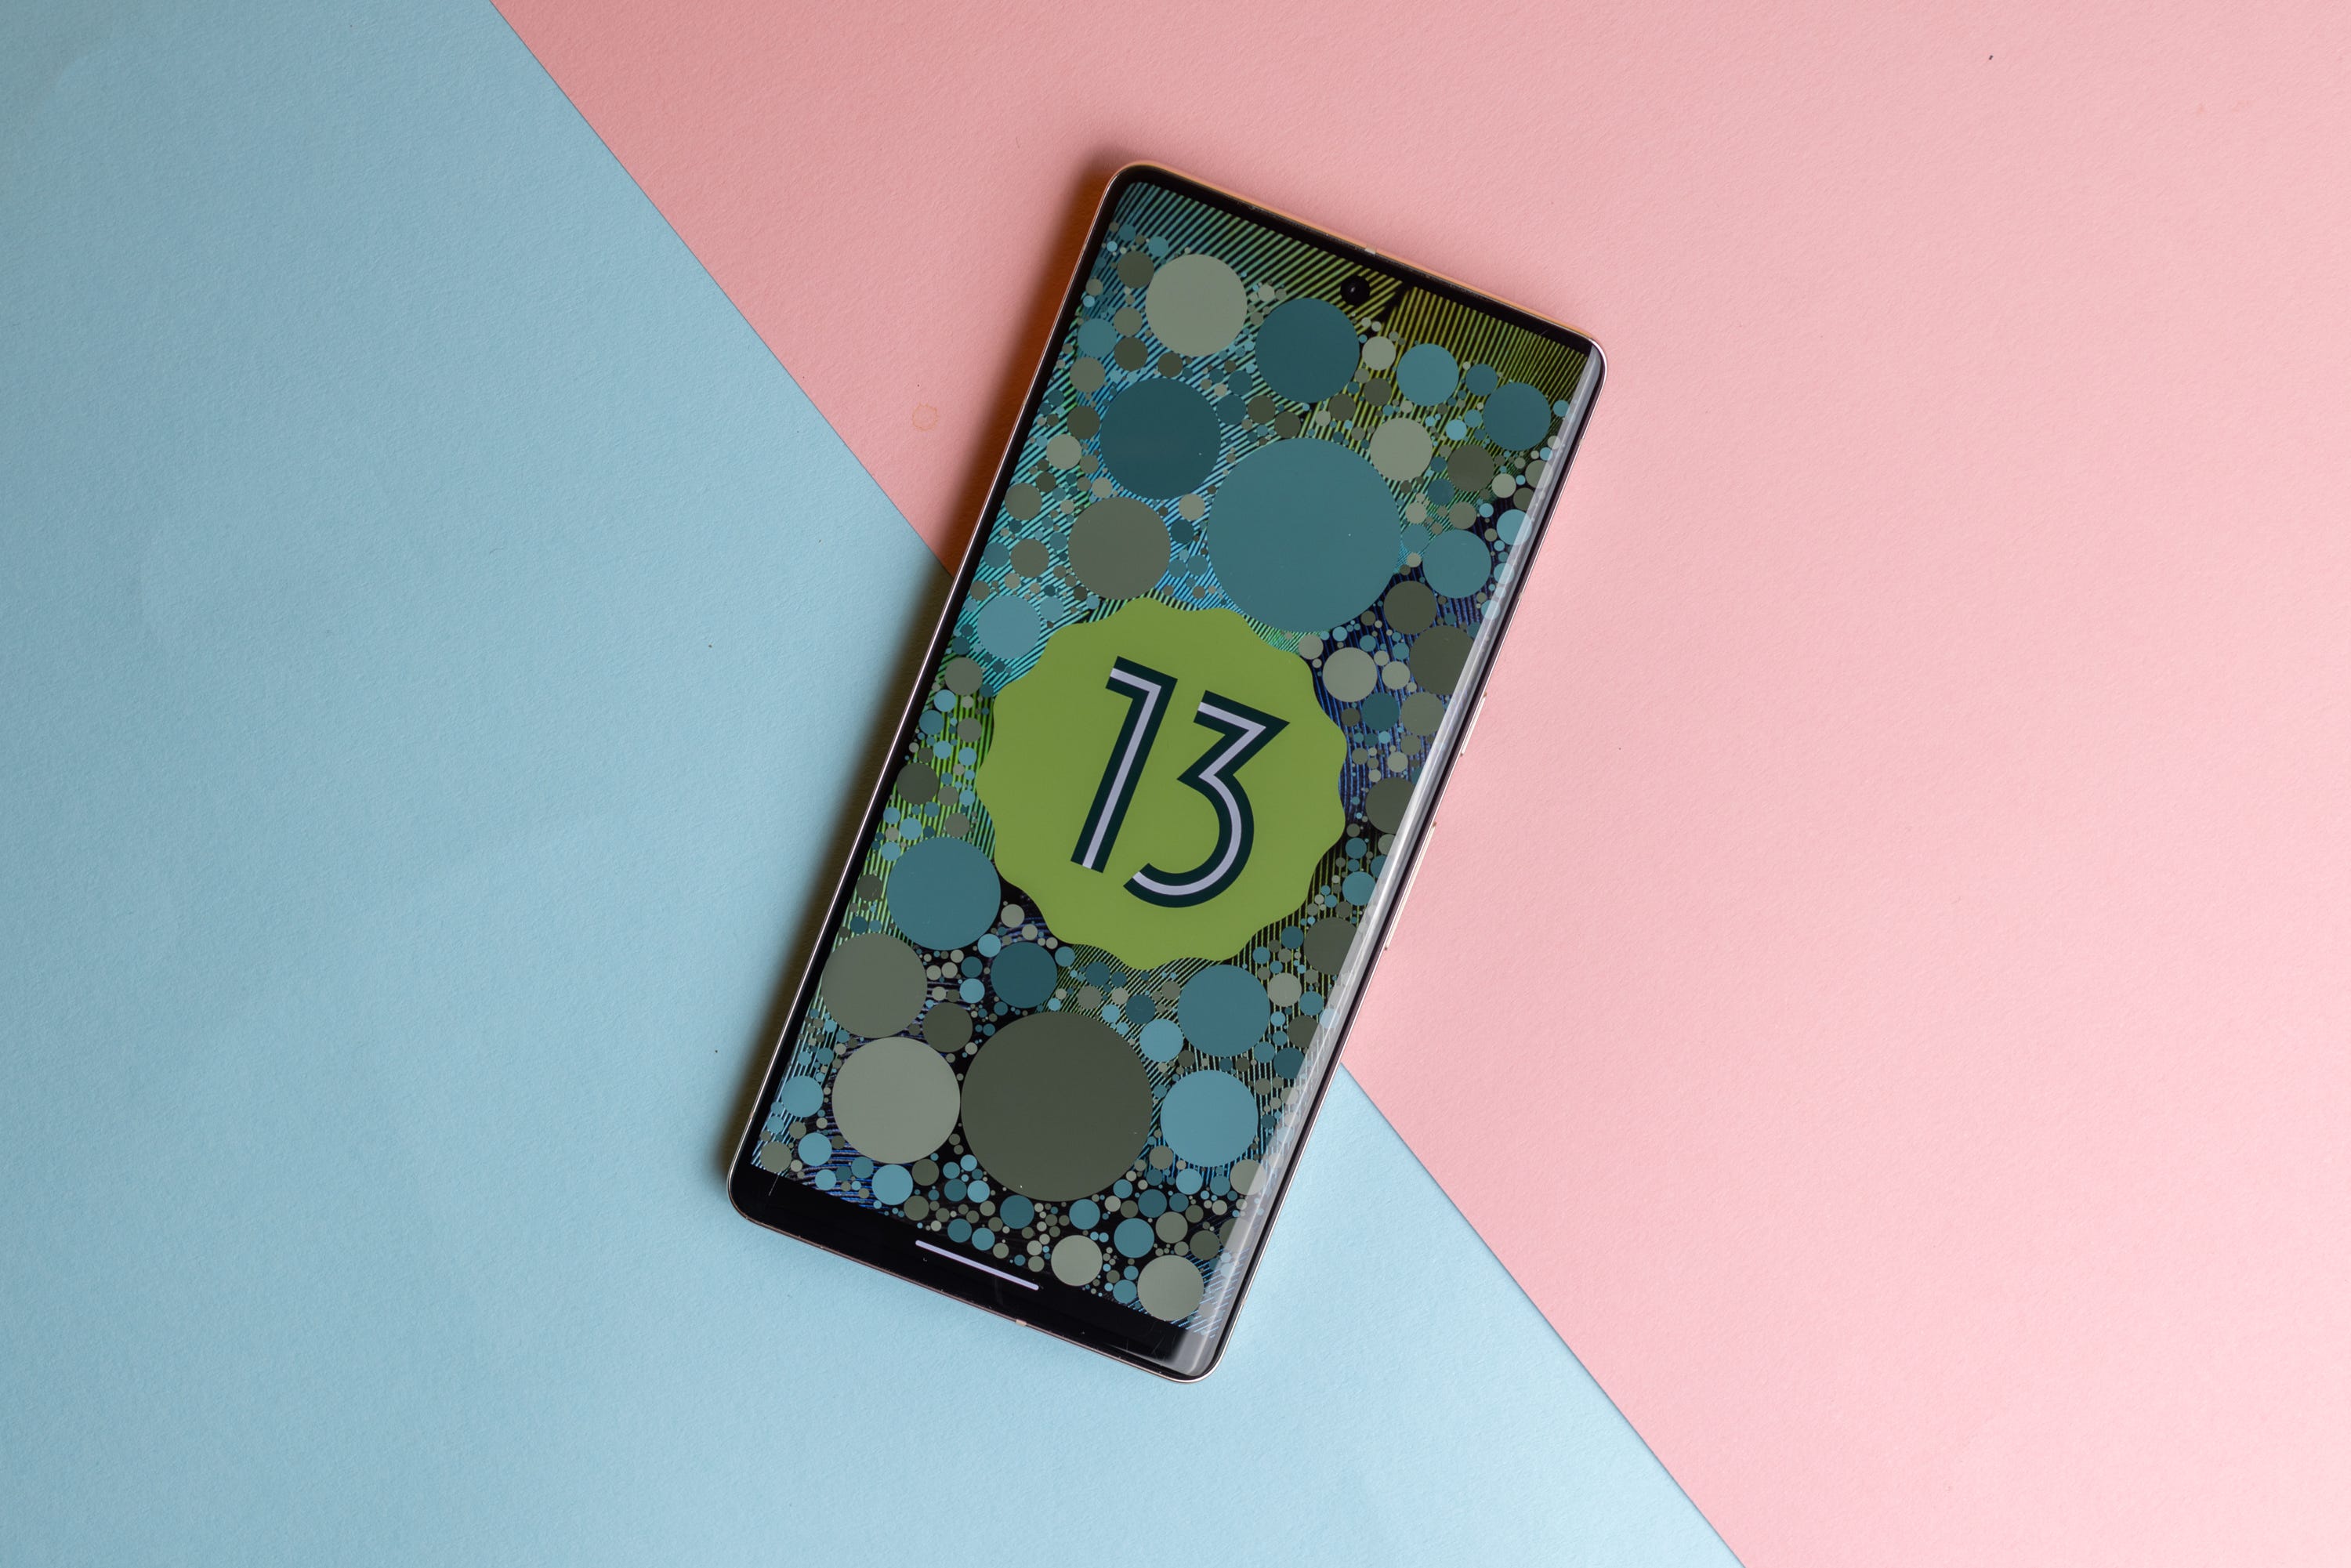 Pixel 7 Pro phone with Android 13 logo on screen, on a blue and pink background